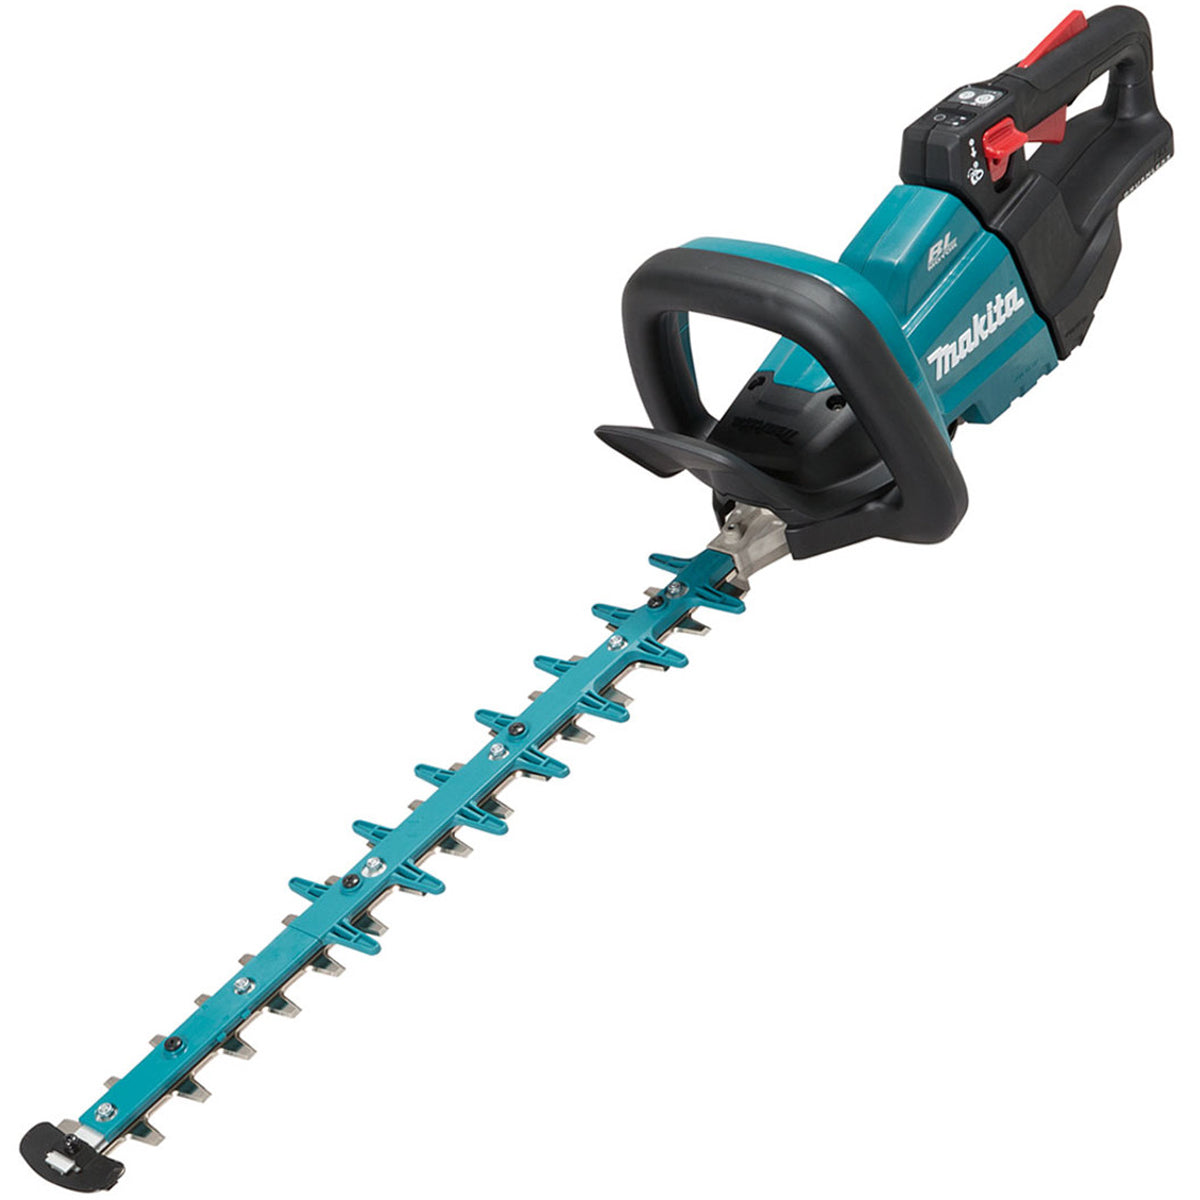 Makita DUH502RT 18V Brushless Hedge Trimmer 50cm With 1 x 5.0Ah Battery & Charger